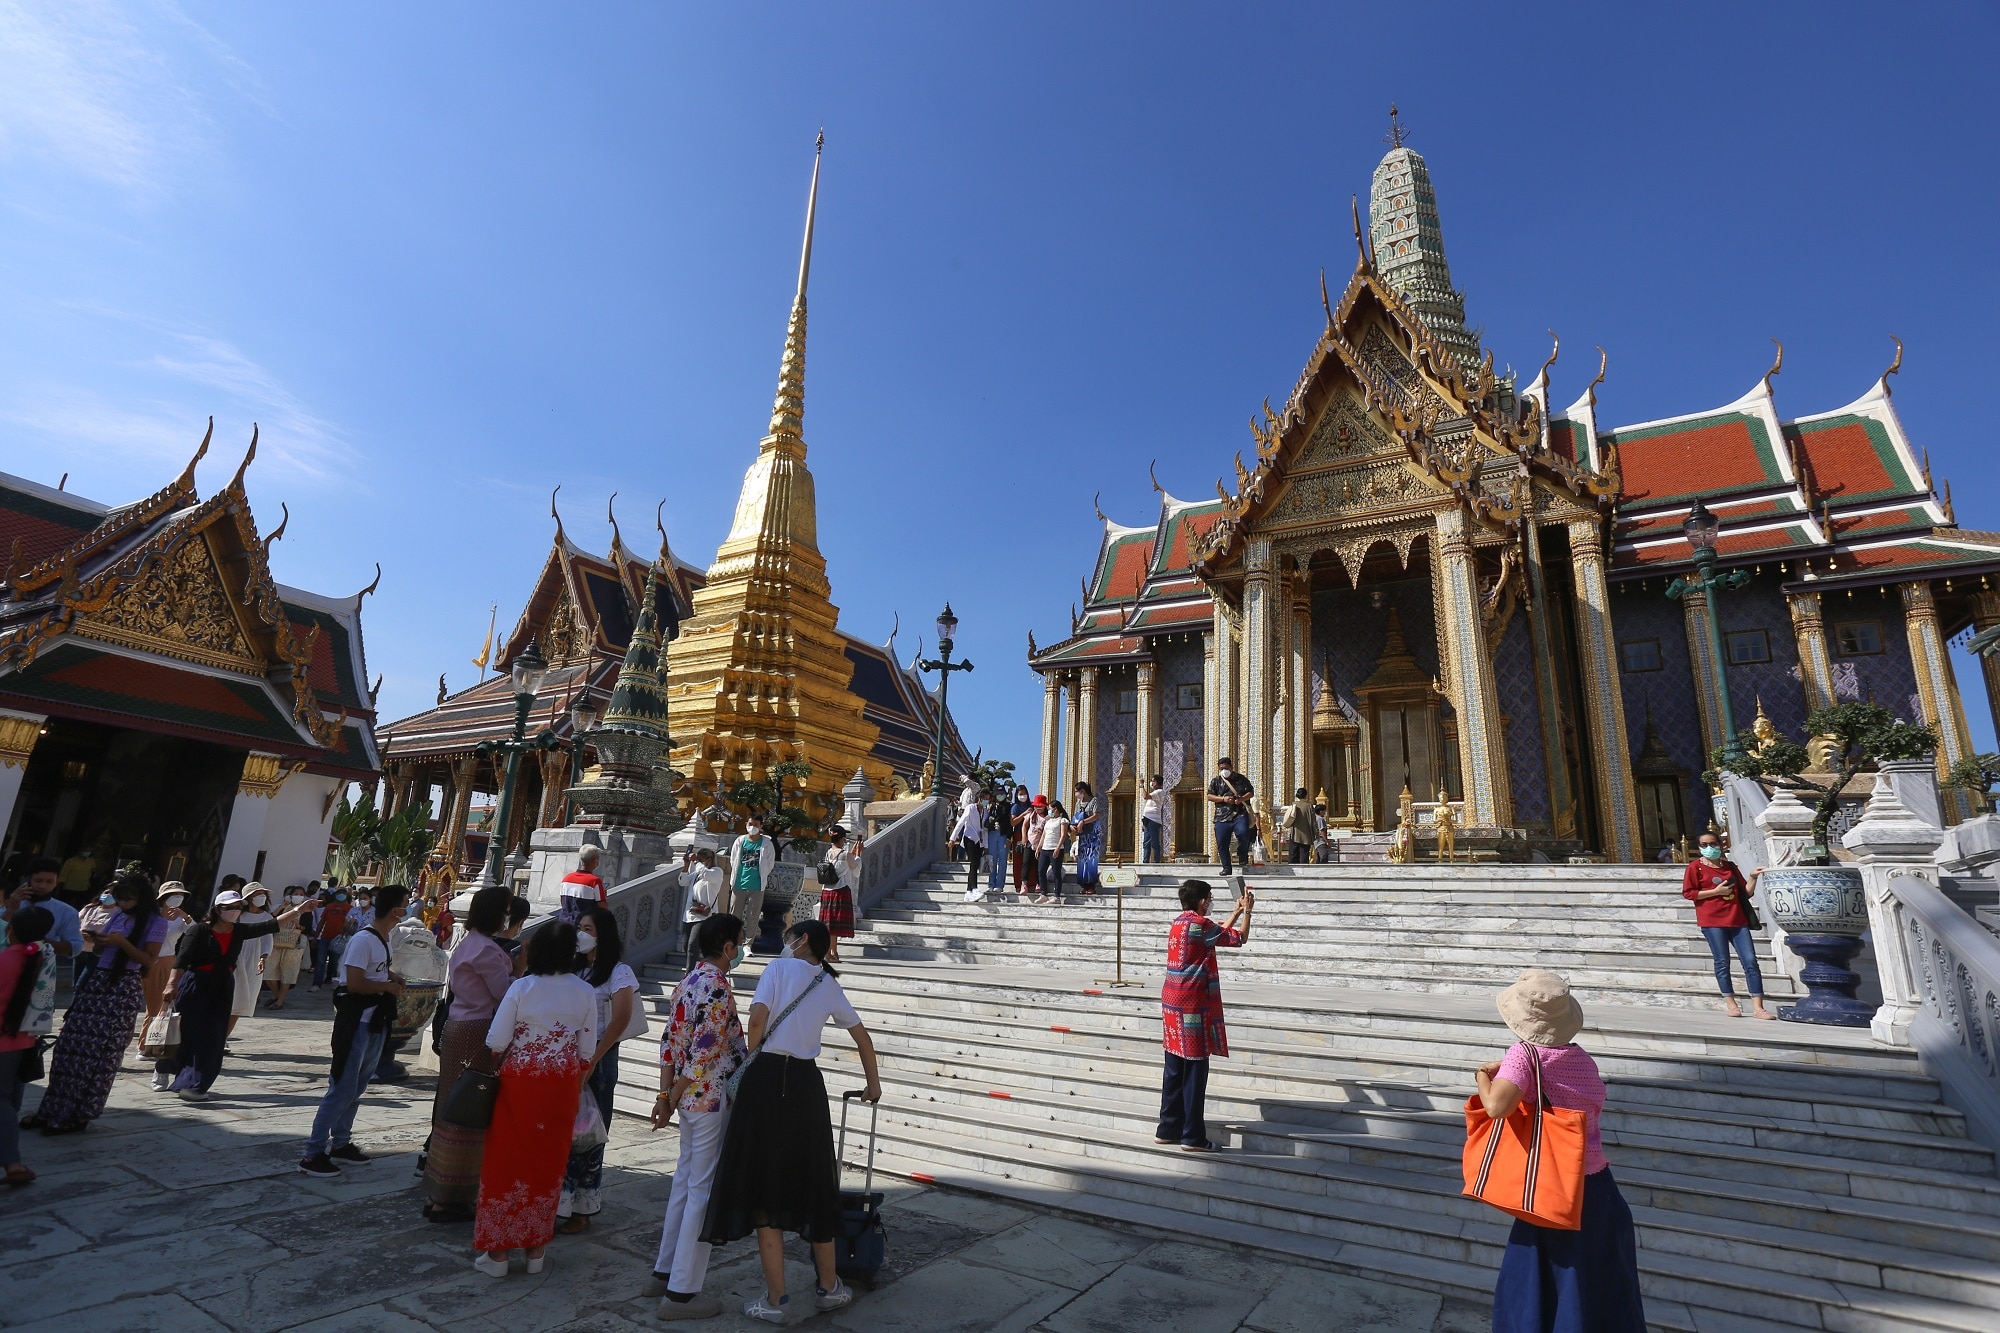 Tourists wearing facemasks as a preventive measure against the spread of coronavirus are seen at the Emerald Buddha Temple inside the Grand Palace in Bangkok. (Photo by Adisorn Chabsungnoen / SOPA Images/Sipa USA)